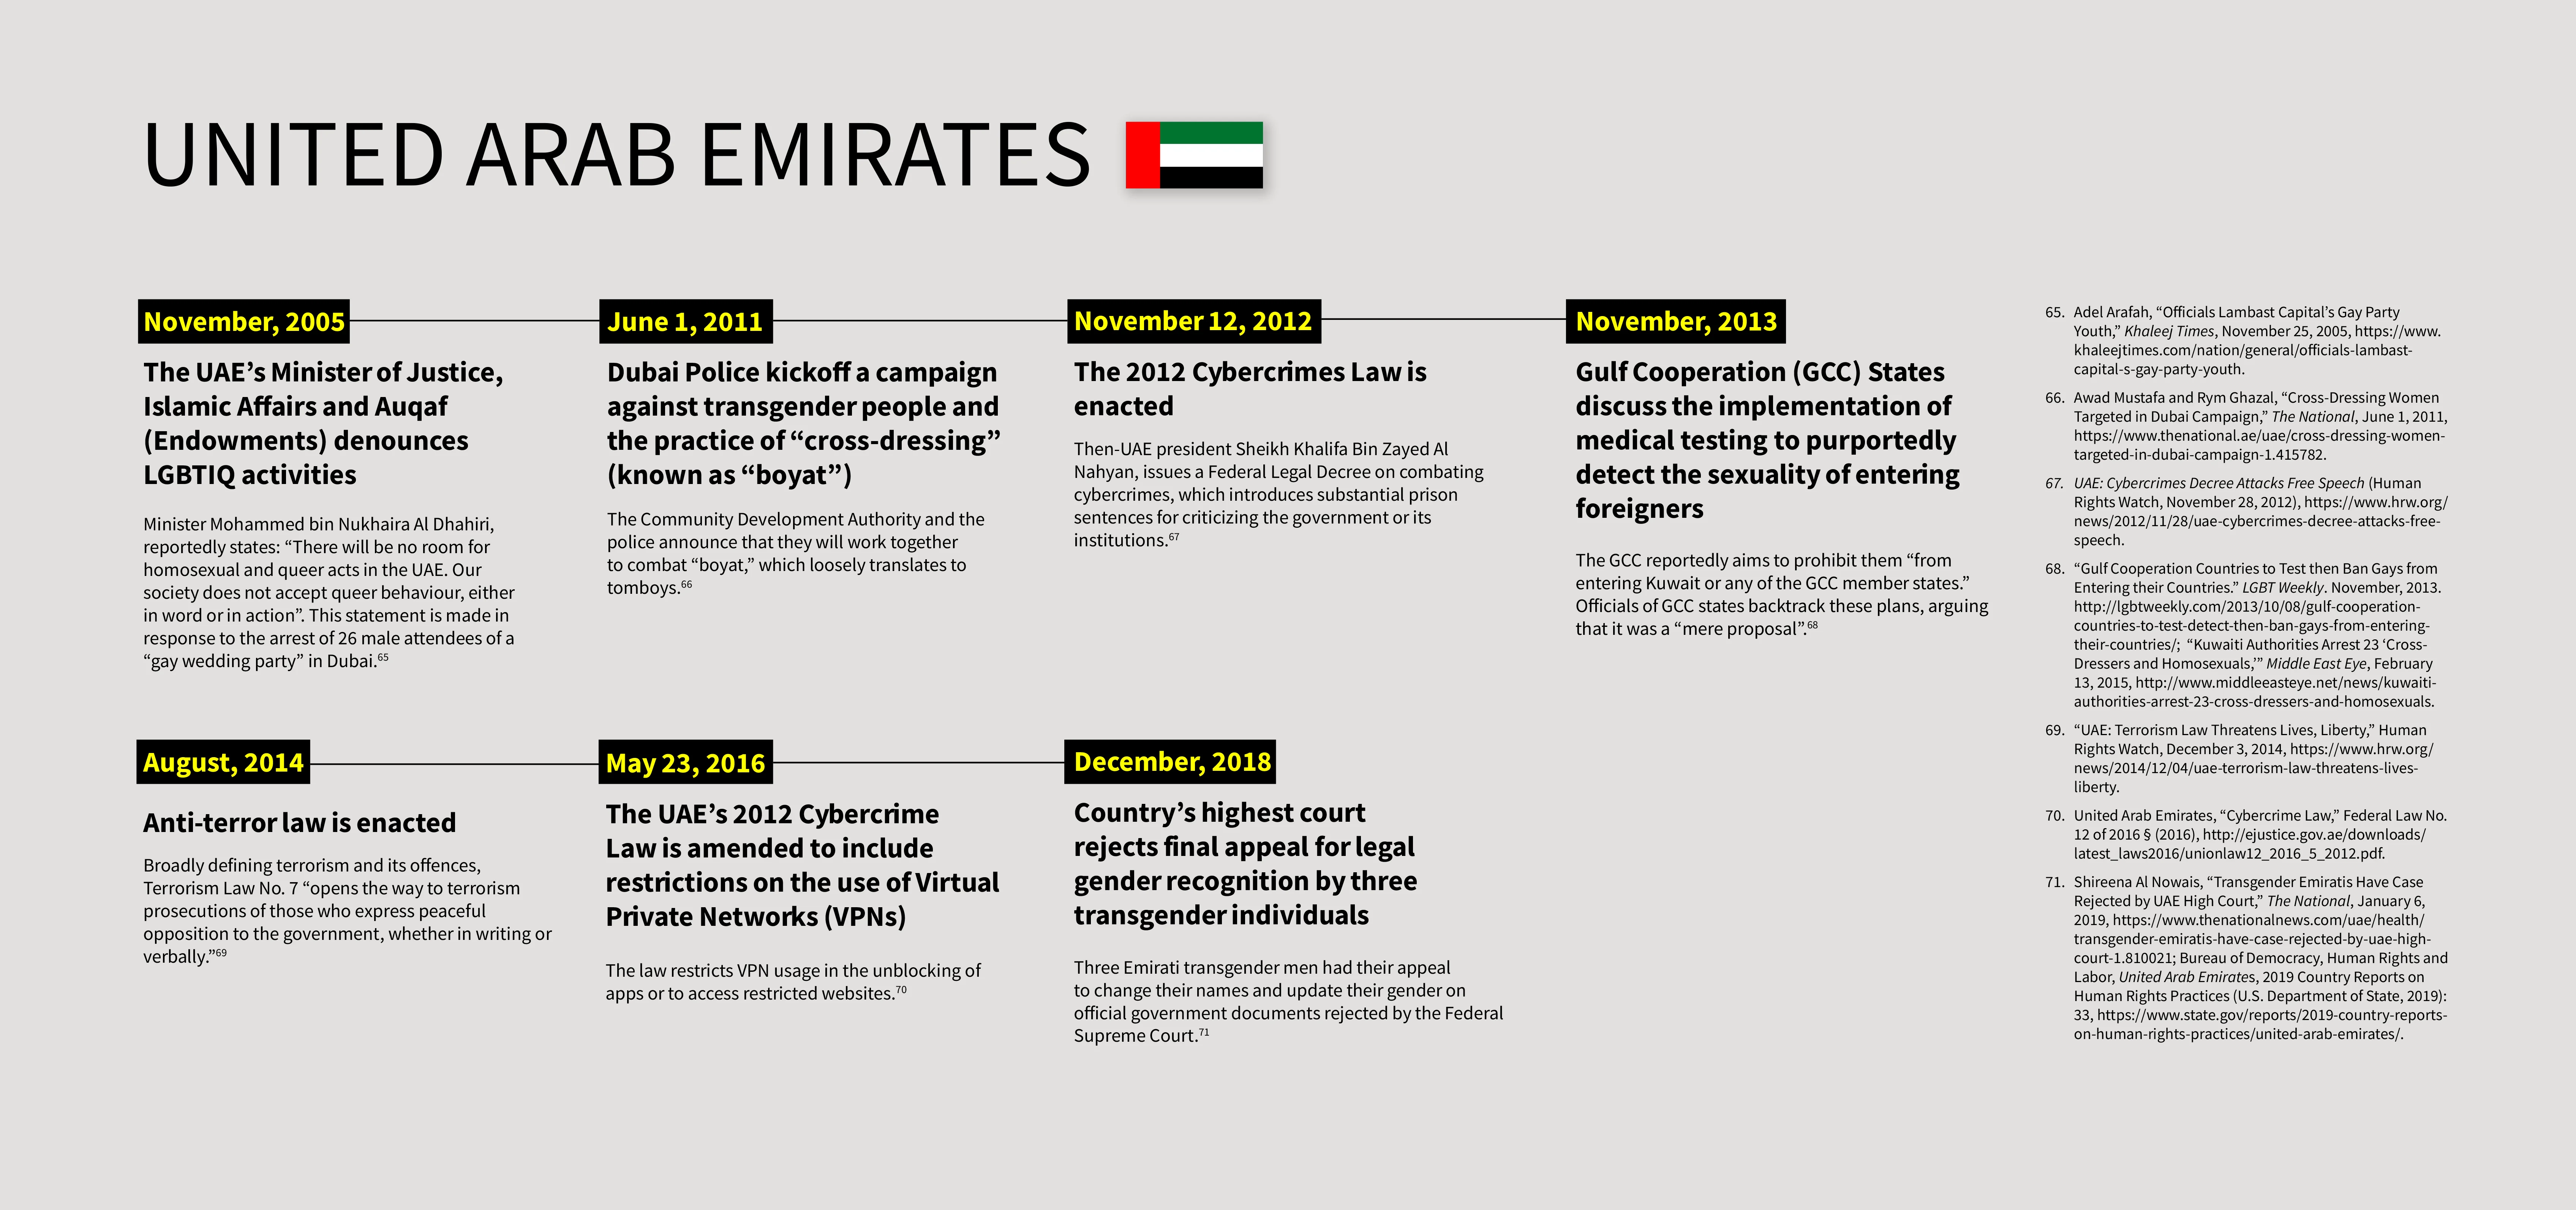 Timeline of selected events in United Arab Emirates